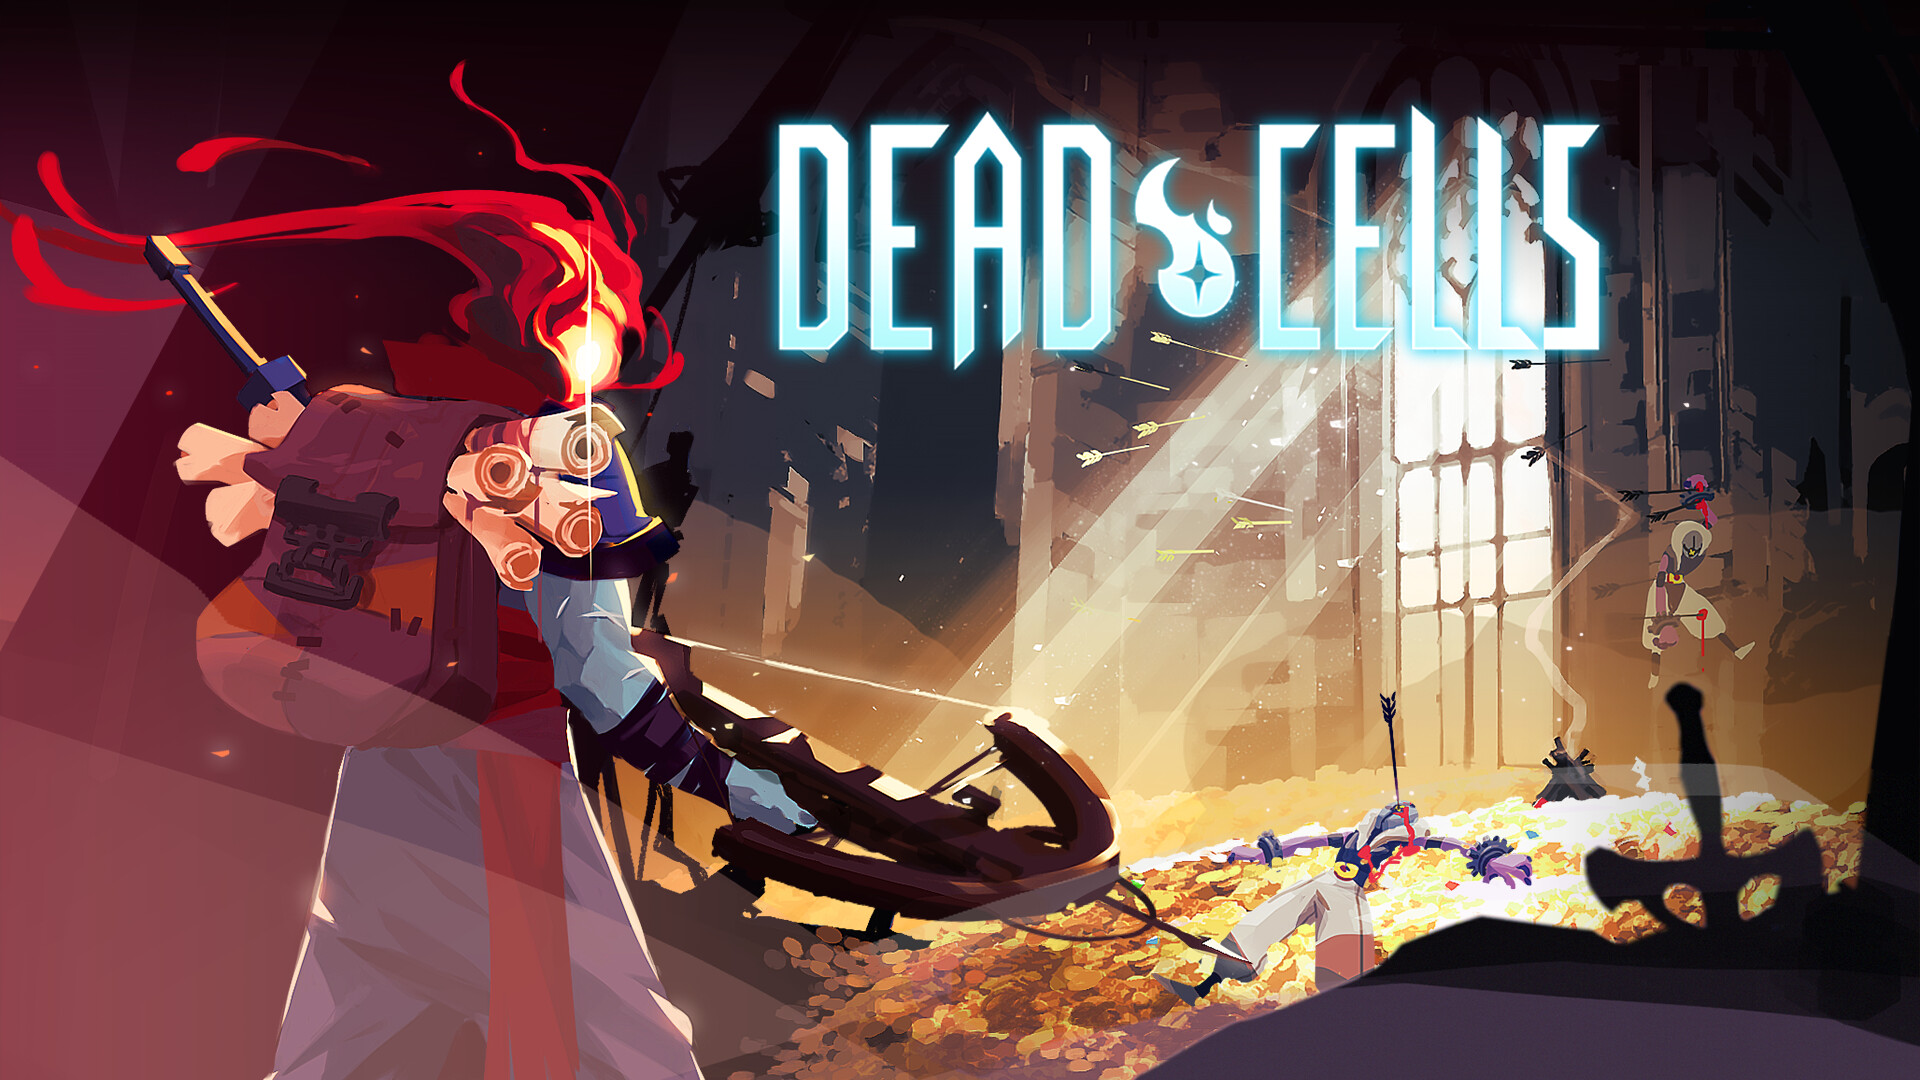 HD Dead Cells game wallpaper featuring dynamic character action for desktop background.